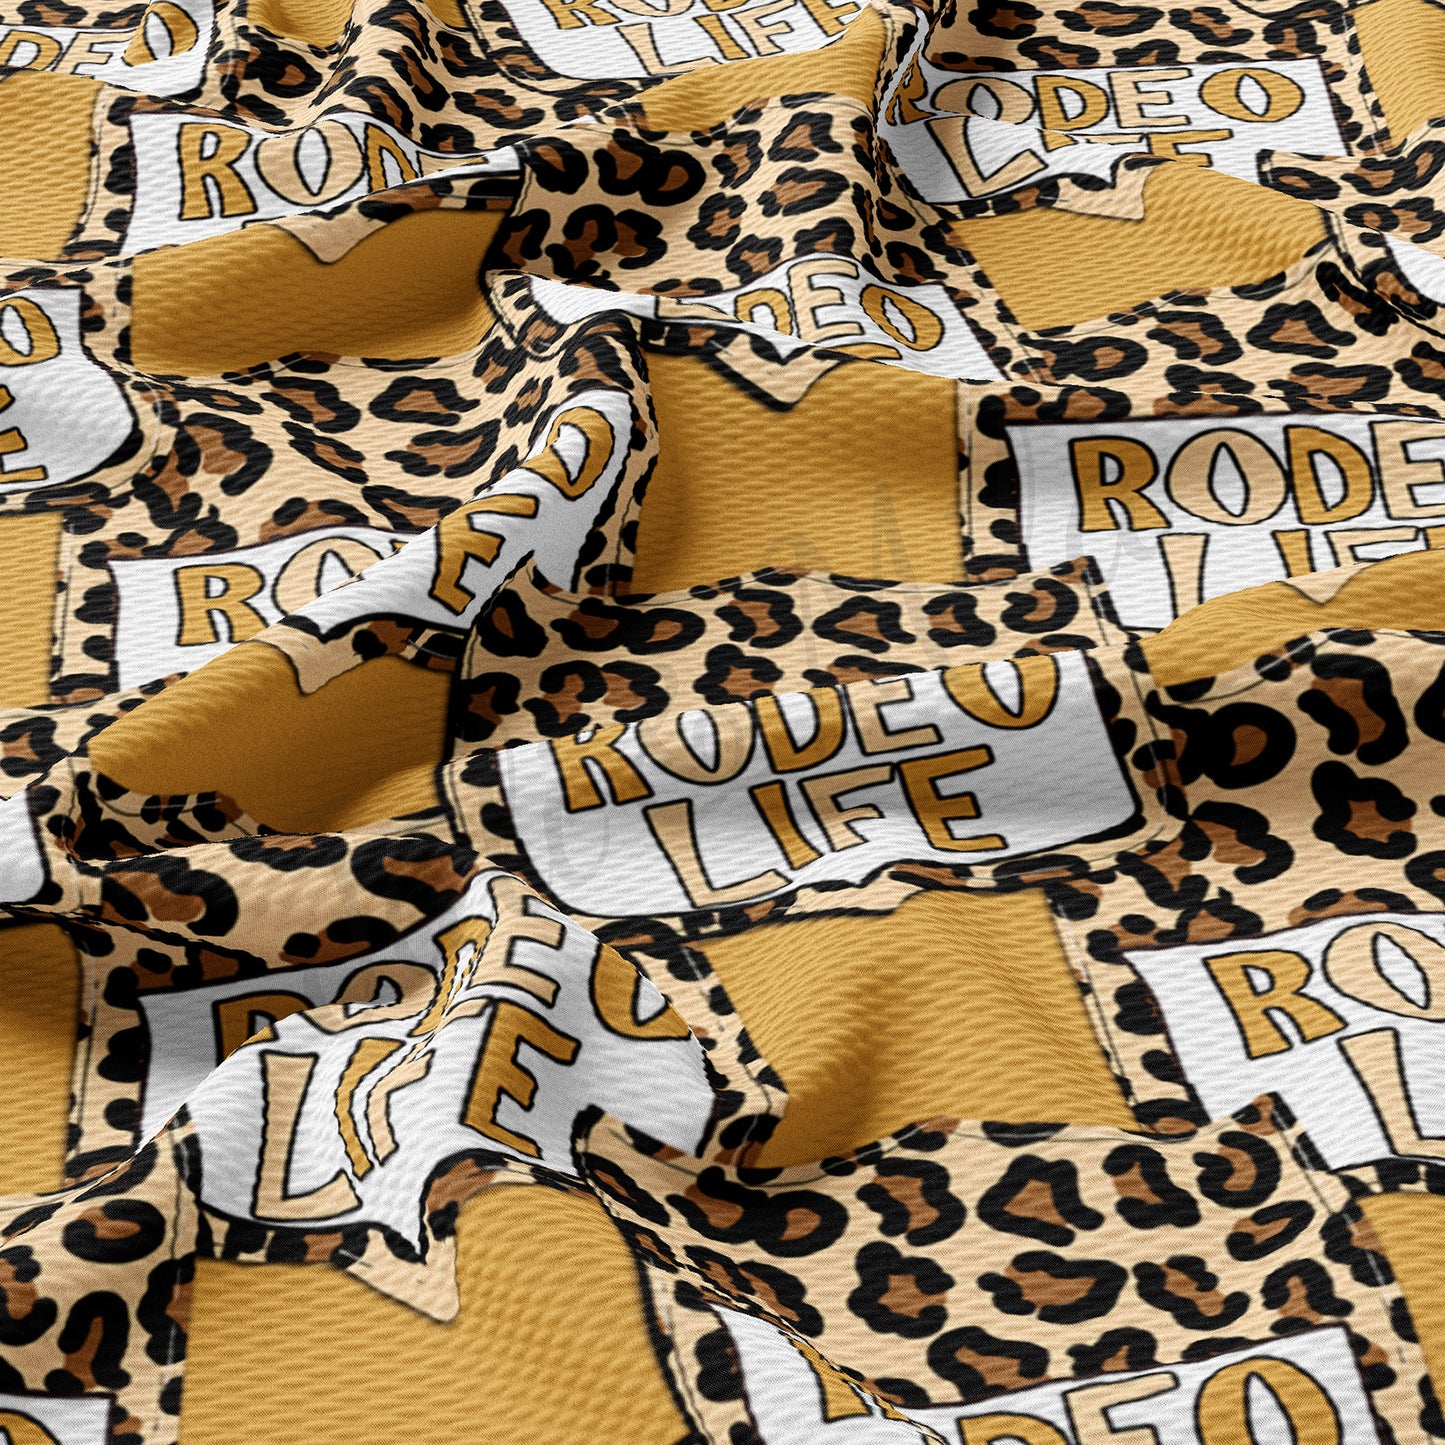 Rodeo Life Printed Bullet Textured Fabric AA1464